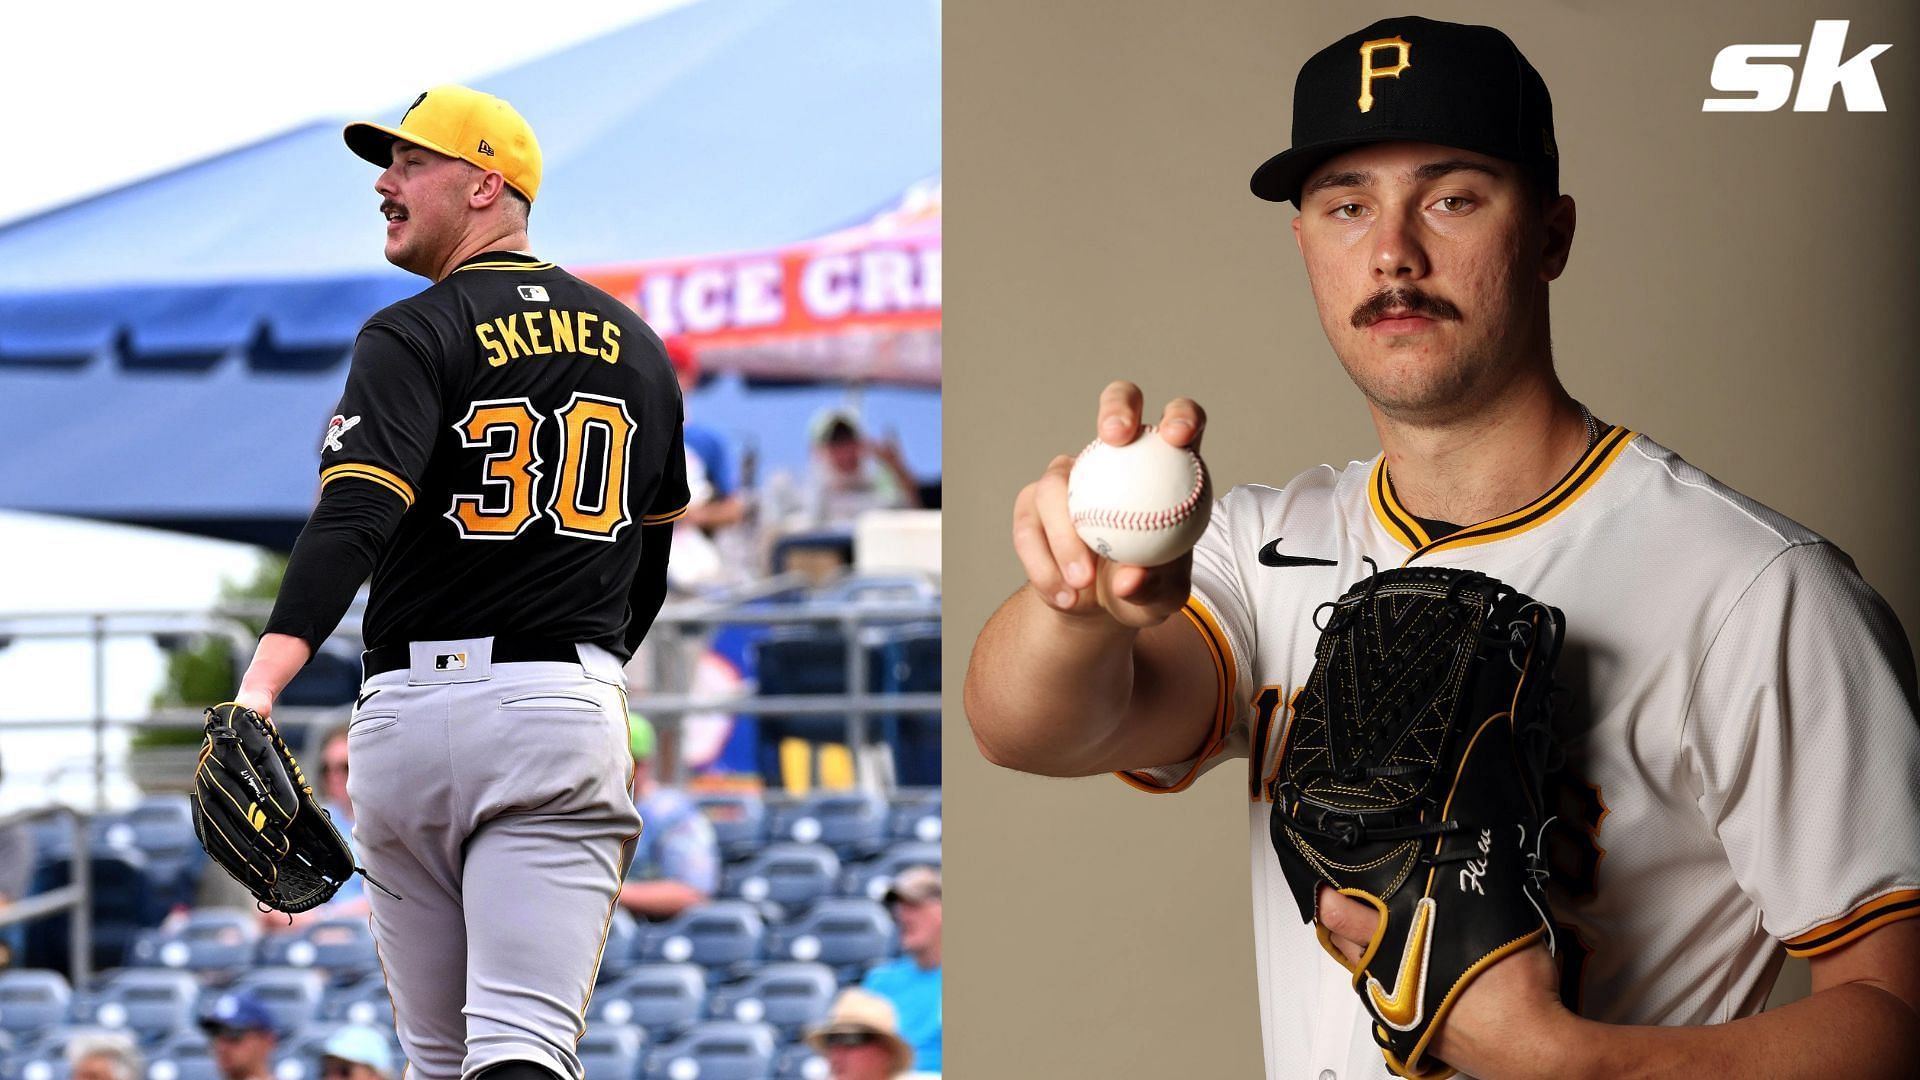 Paukl Skenes might be a must-start pitcher for his MLB debut in fantasy baseball leagues